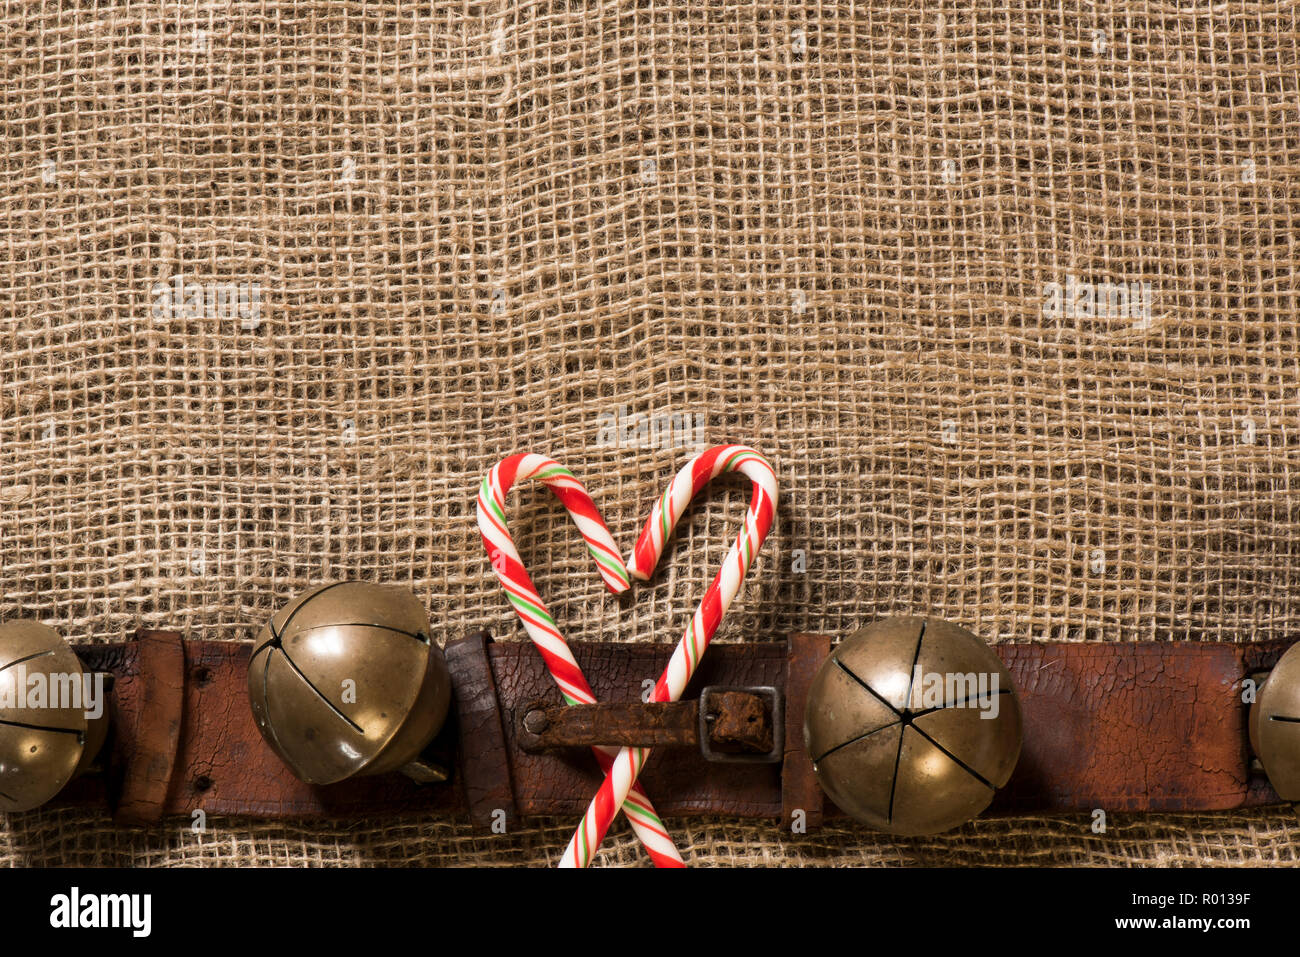 Antique sleigh bells and leather harness on burlap. Stock Photo